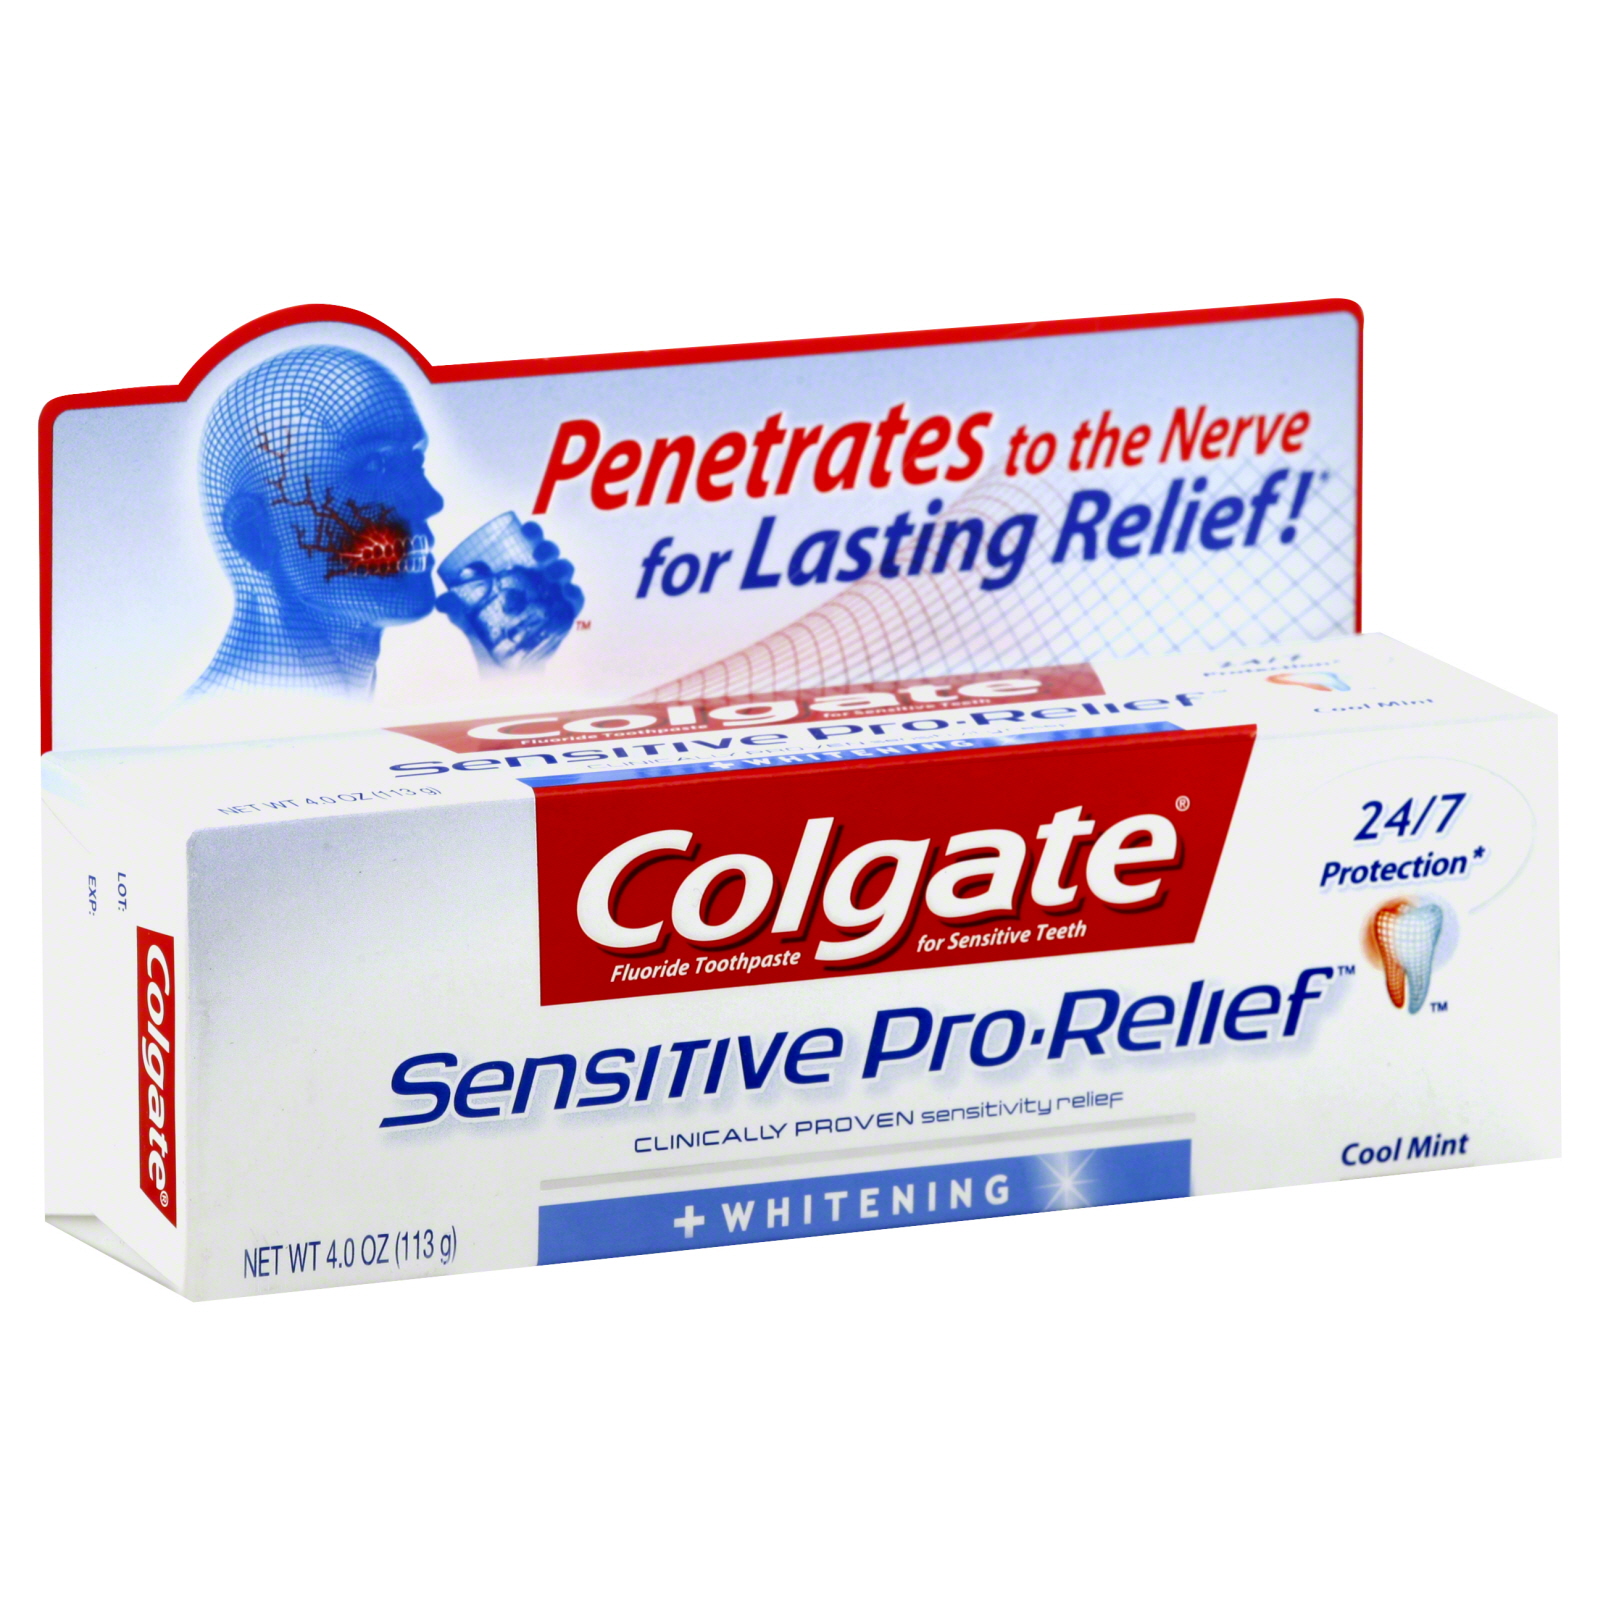 Colgate-Palmolive Sensitive Pro-Relief Toothpaste, for Sensitive Teeth, + Whitening 4 oz